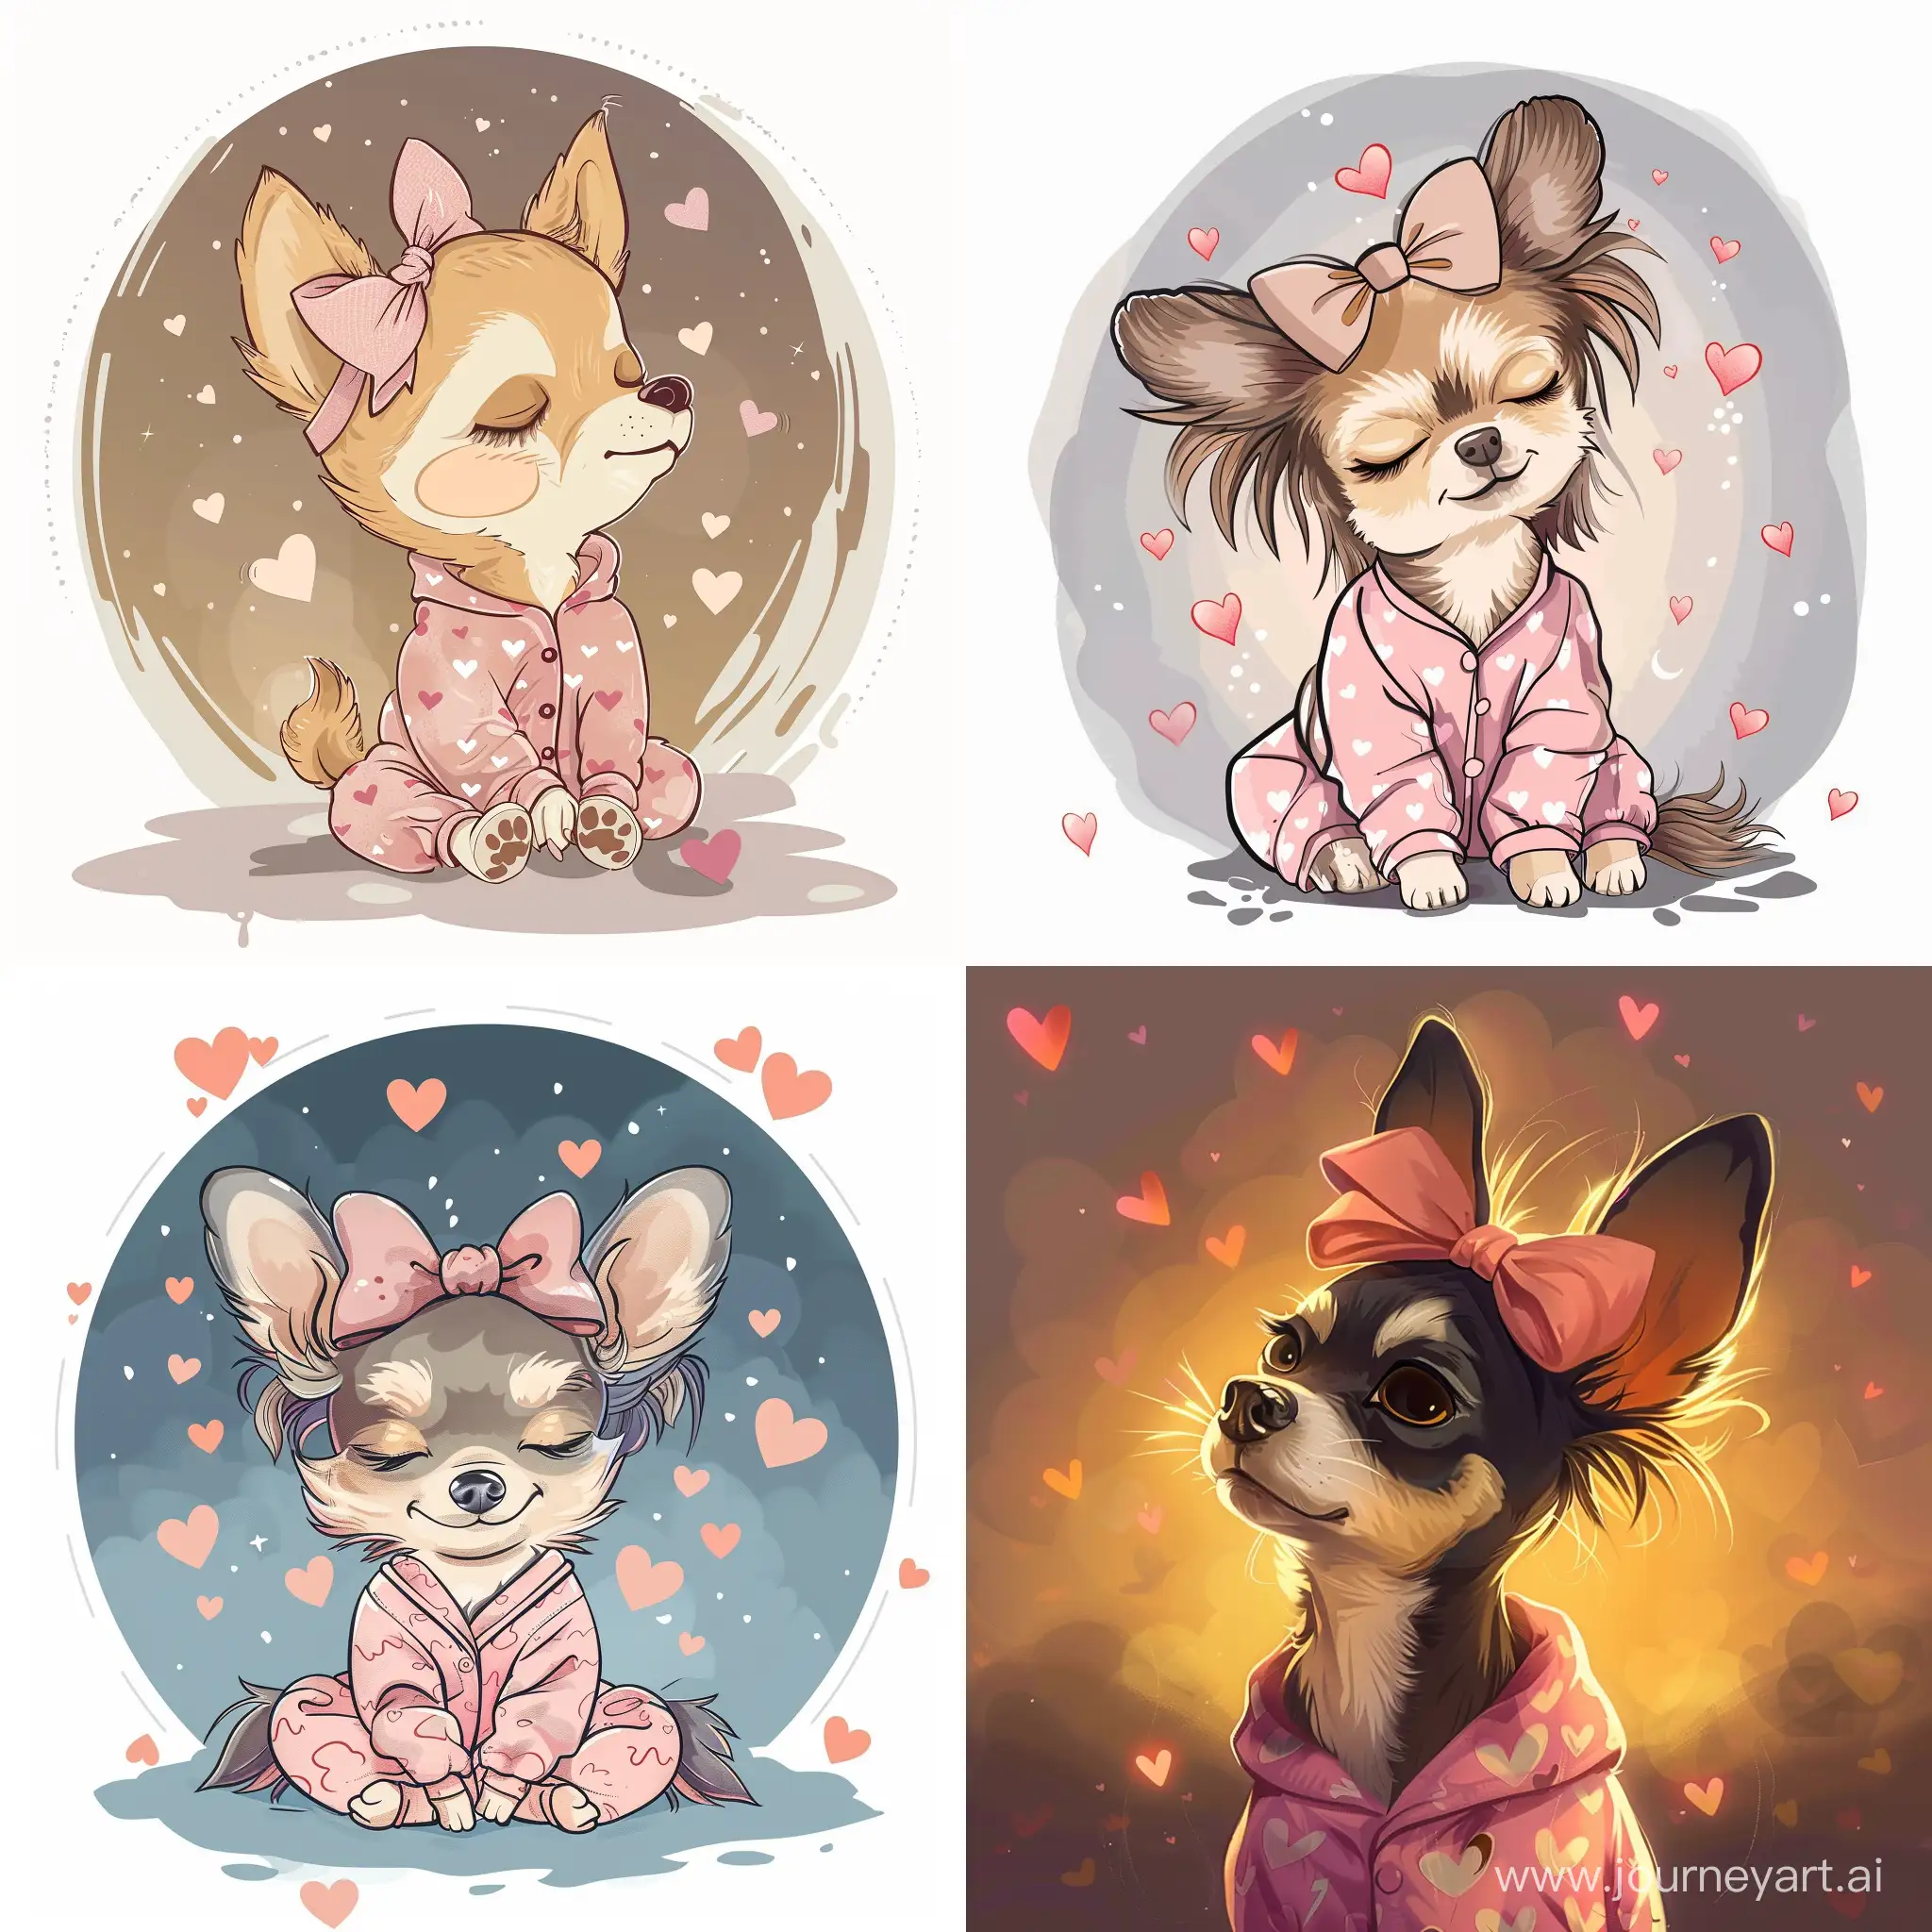 Sweet-Dreams-Adorable-Chihuahua-in-Pink-Pajamas-with-Floating-Hearts